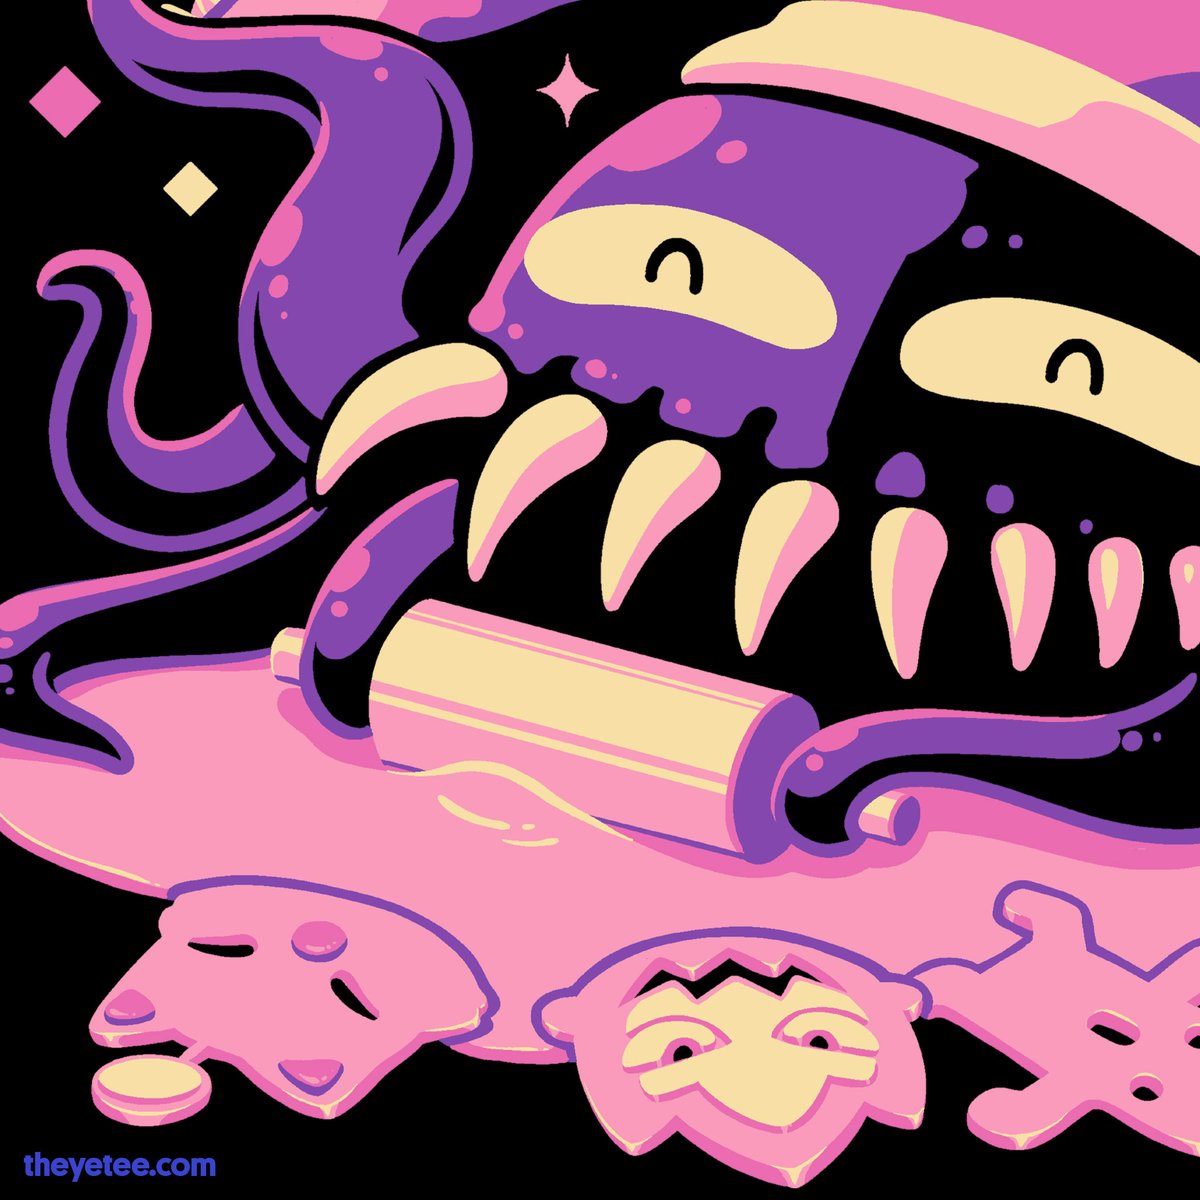 「Start making your list and check it twic」|The Yetee 🌈のイラスト